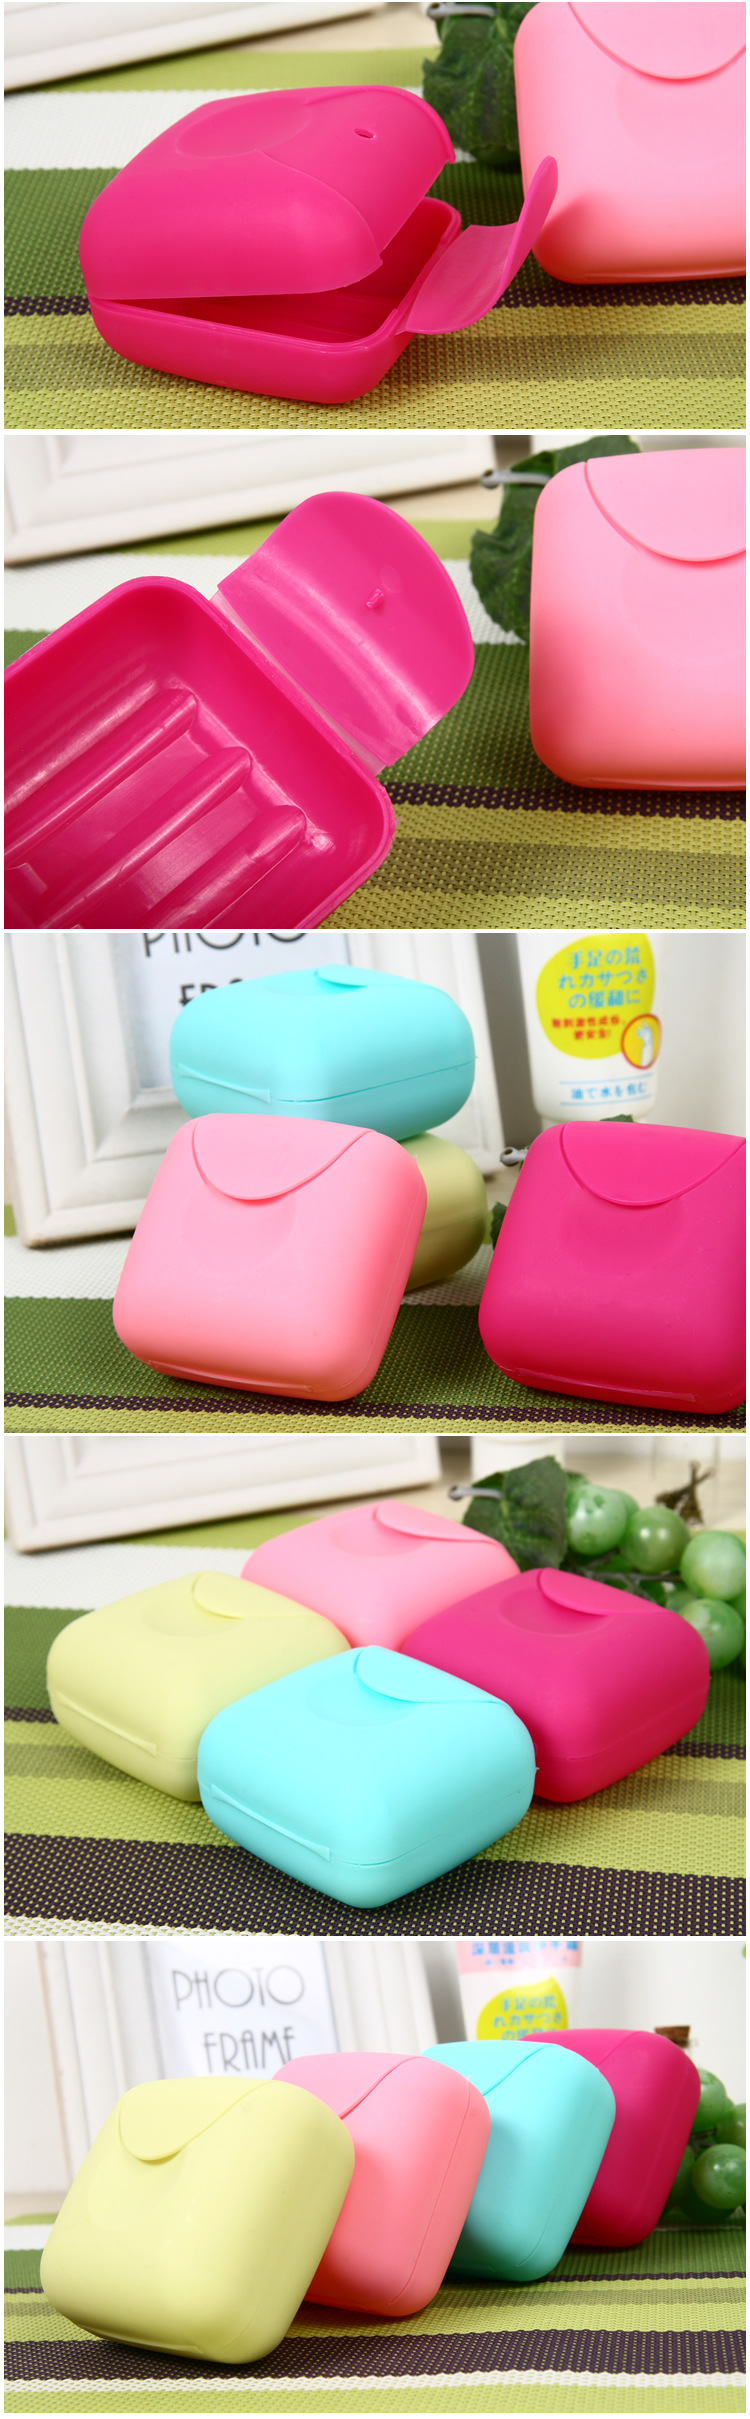 Honana-BX--927-Bathroom-Soap-Dish-Travel-Soap-Box-Dish-Plate-Holder-Container-Case-Foaming-Candy-Col-1218034